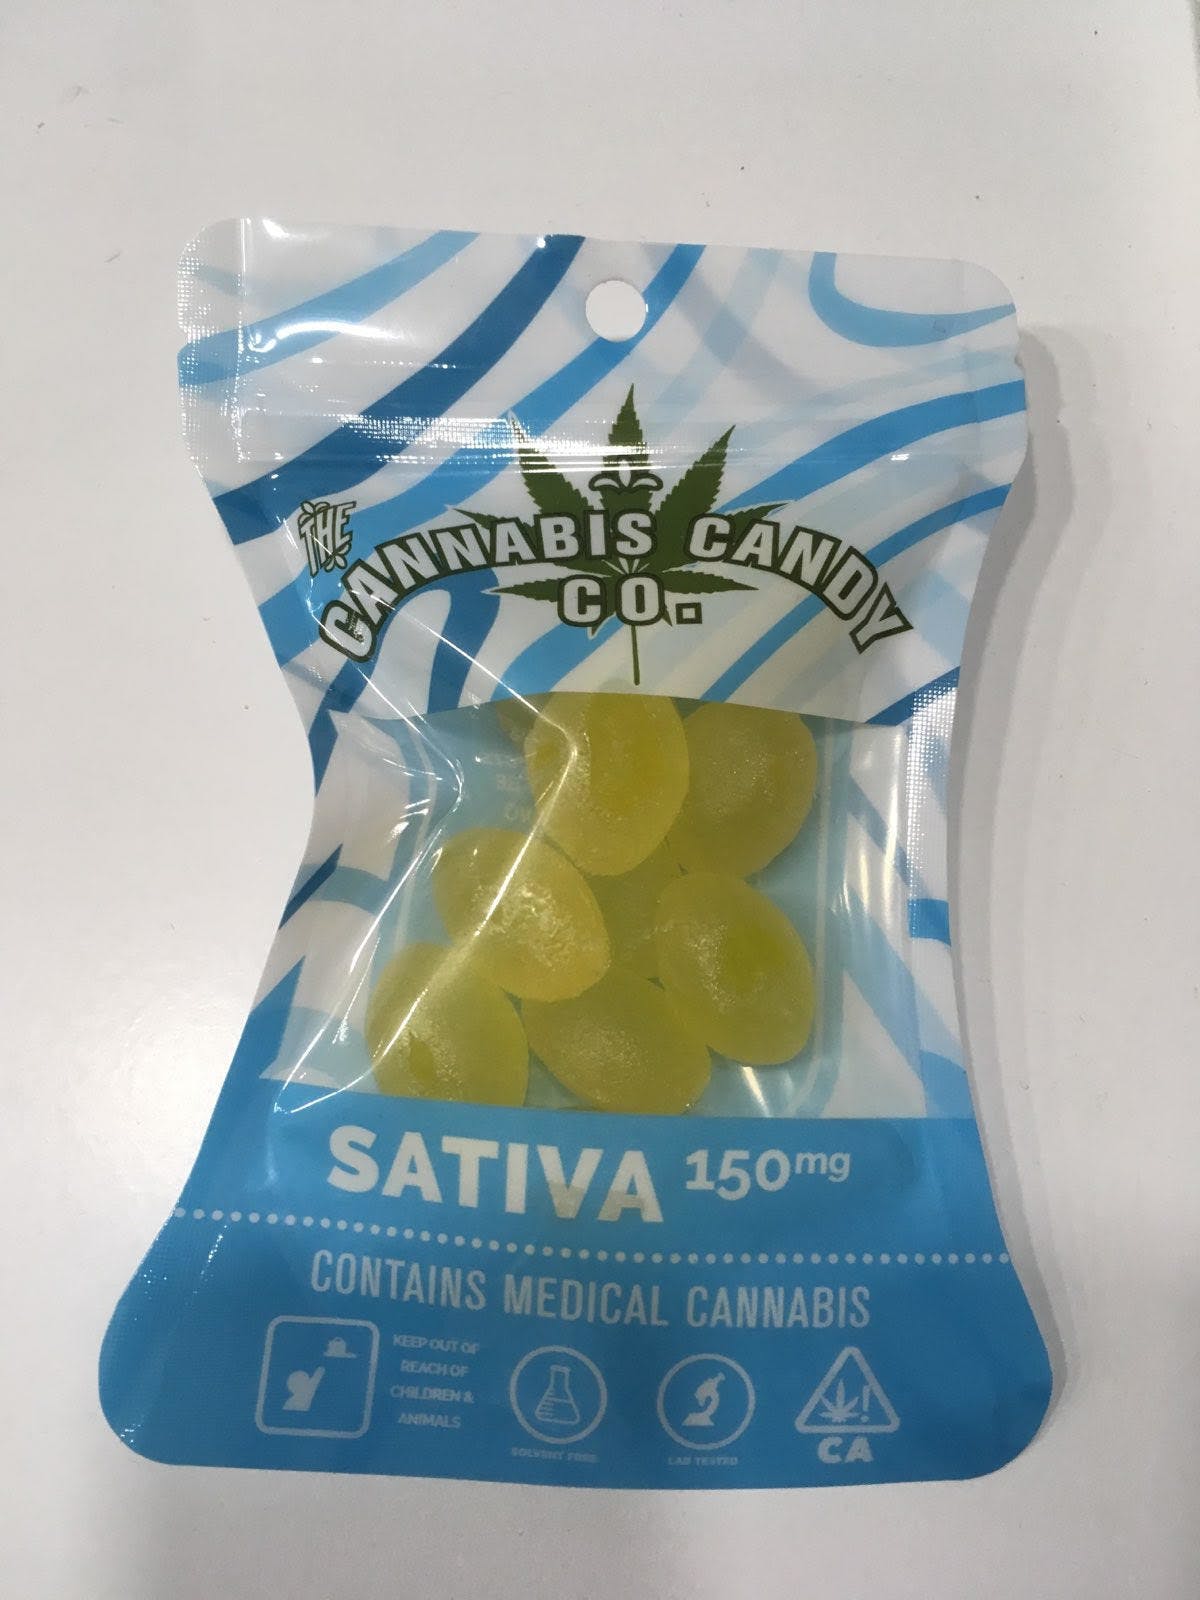 edible-cannabis-candy-co-150mg-3-for-25